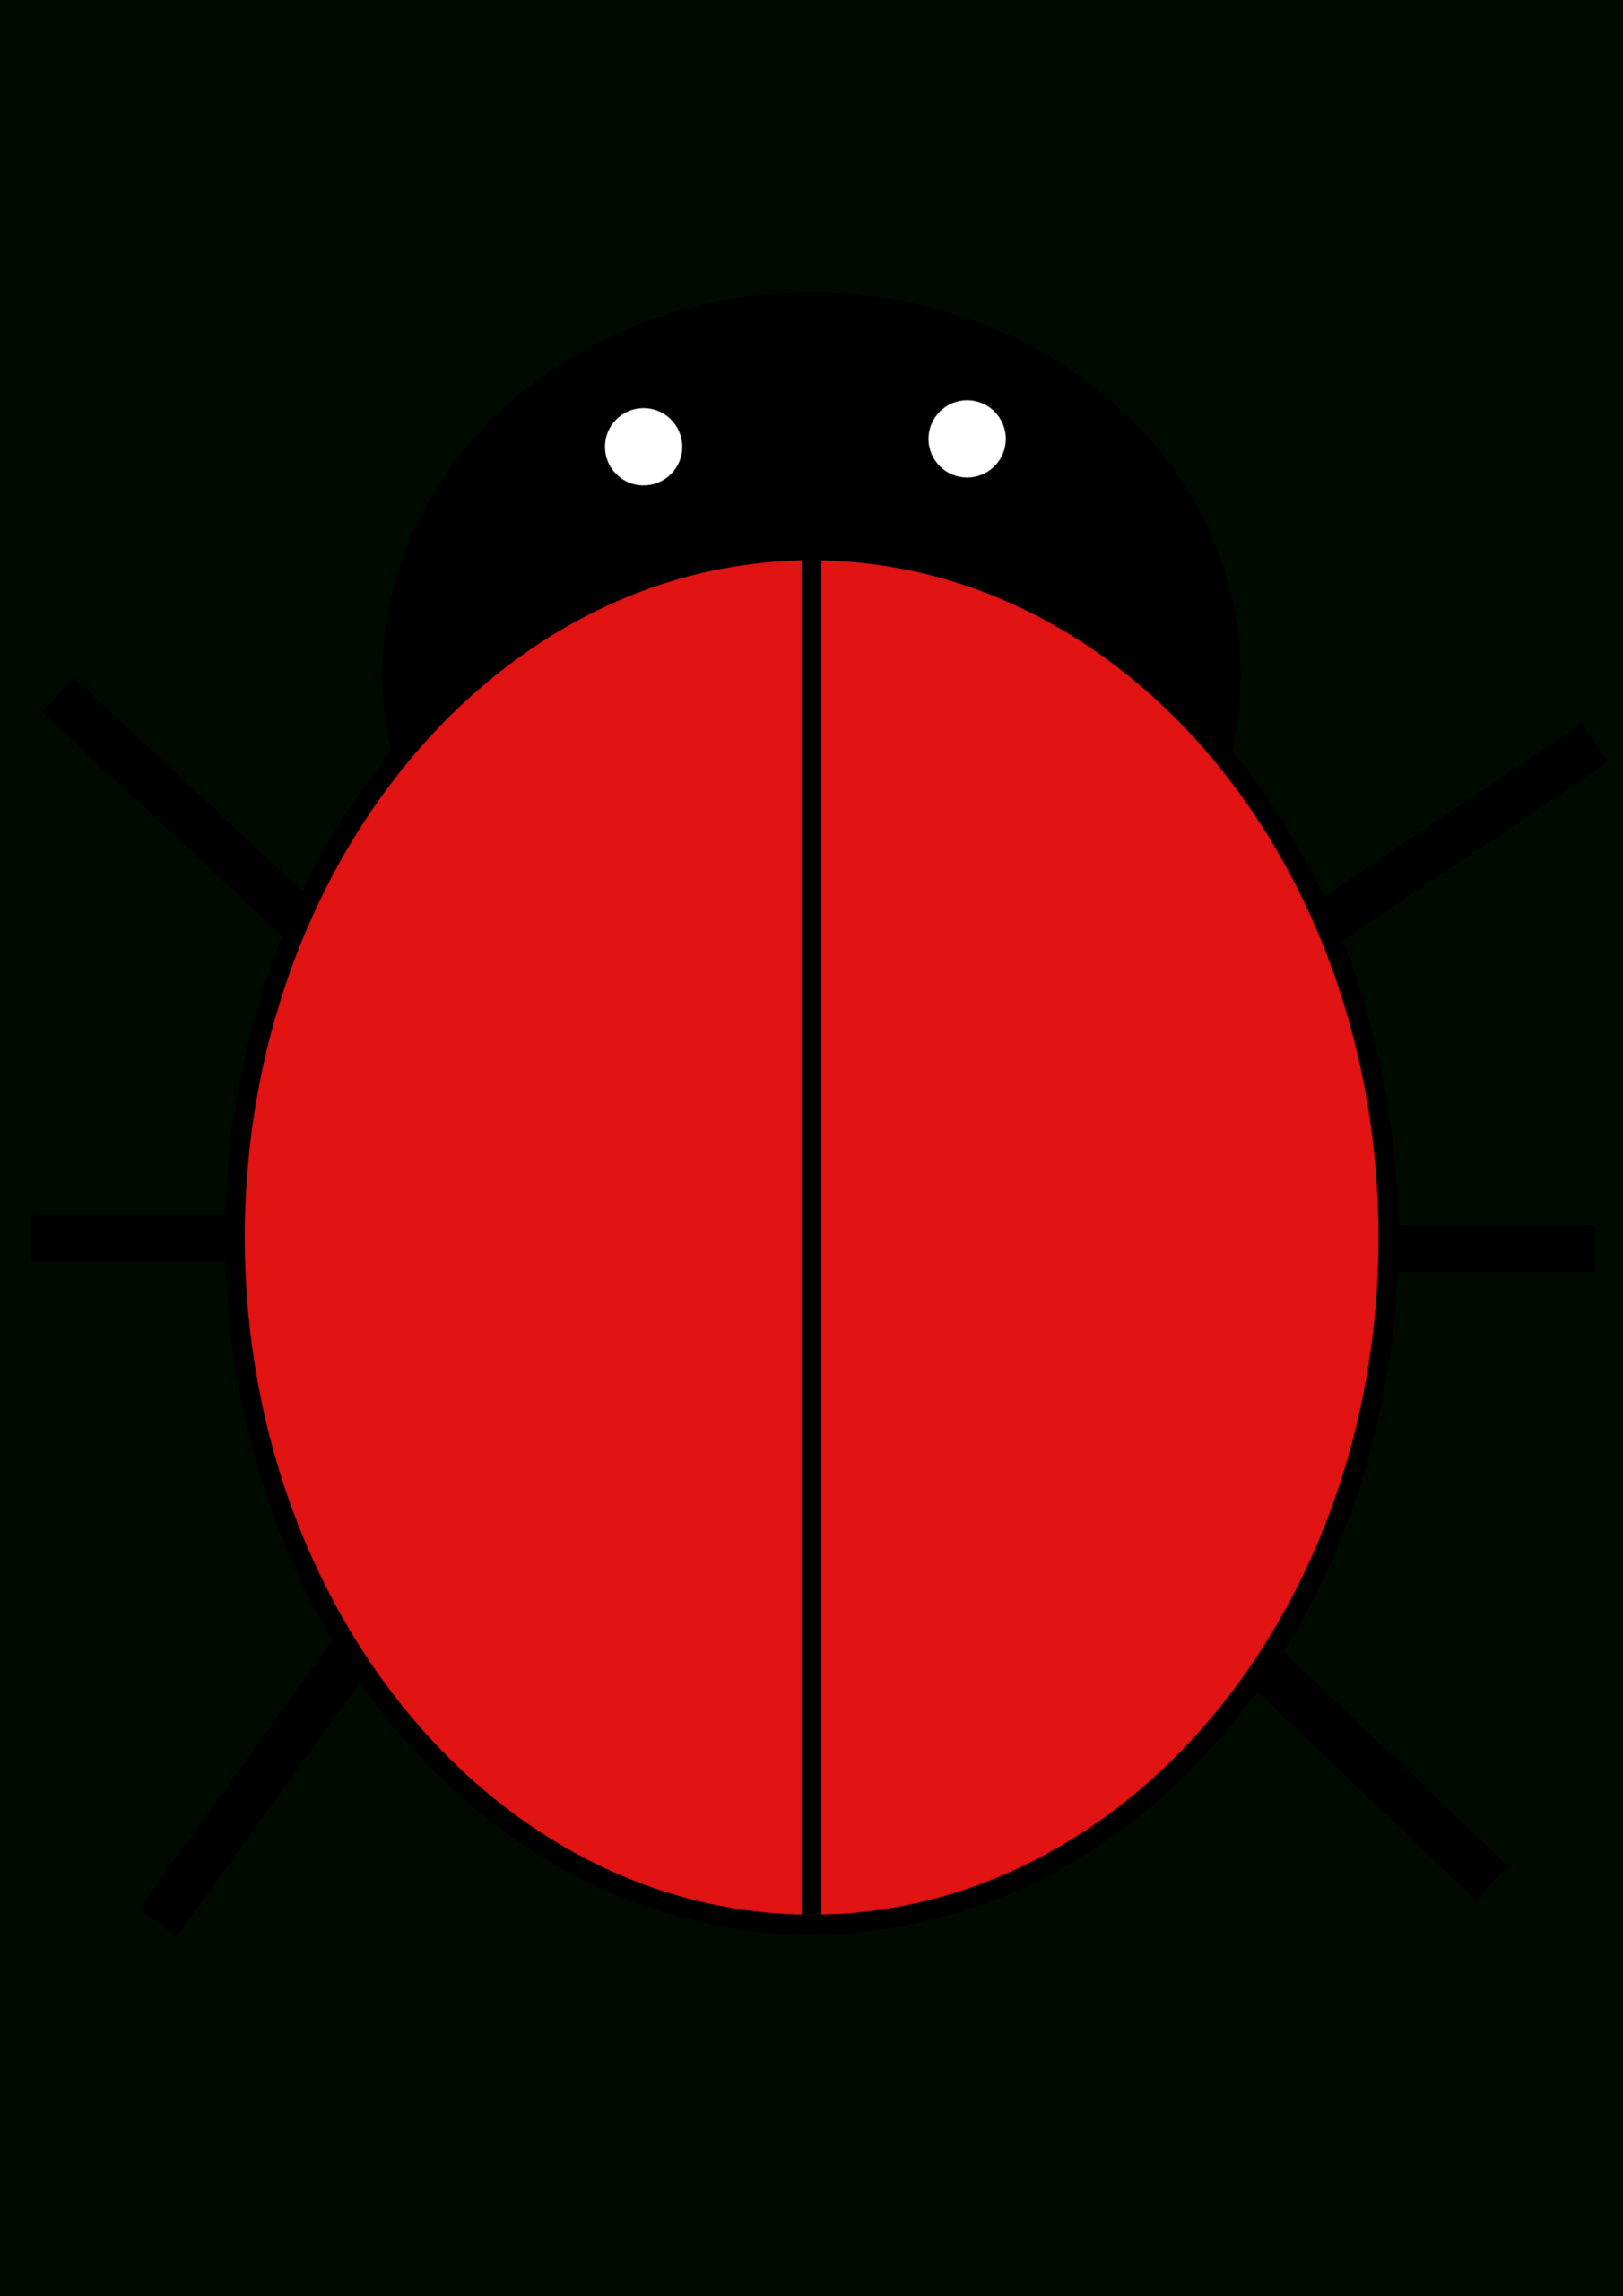 Ladybird | Free Images At Clker - Vector Clip Art Online With Blank Ladybug Template